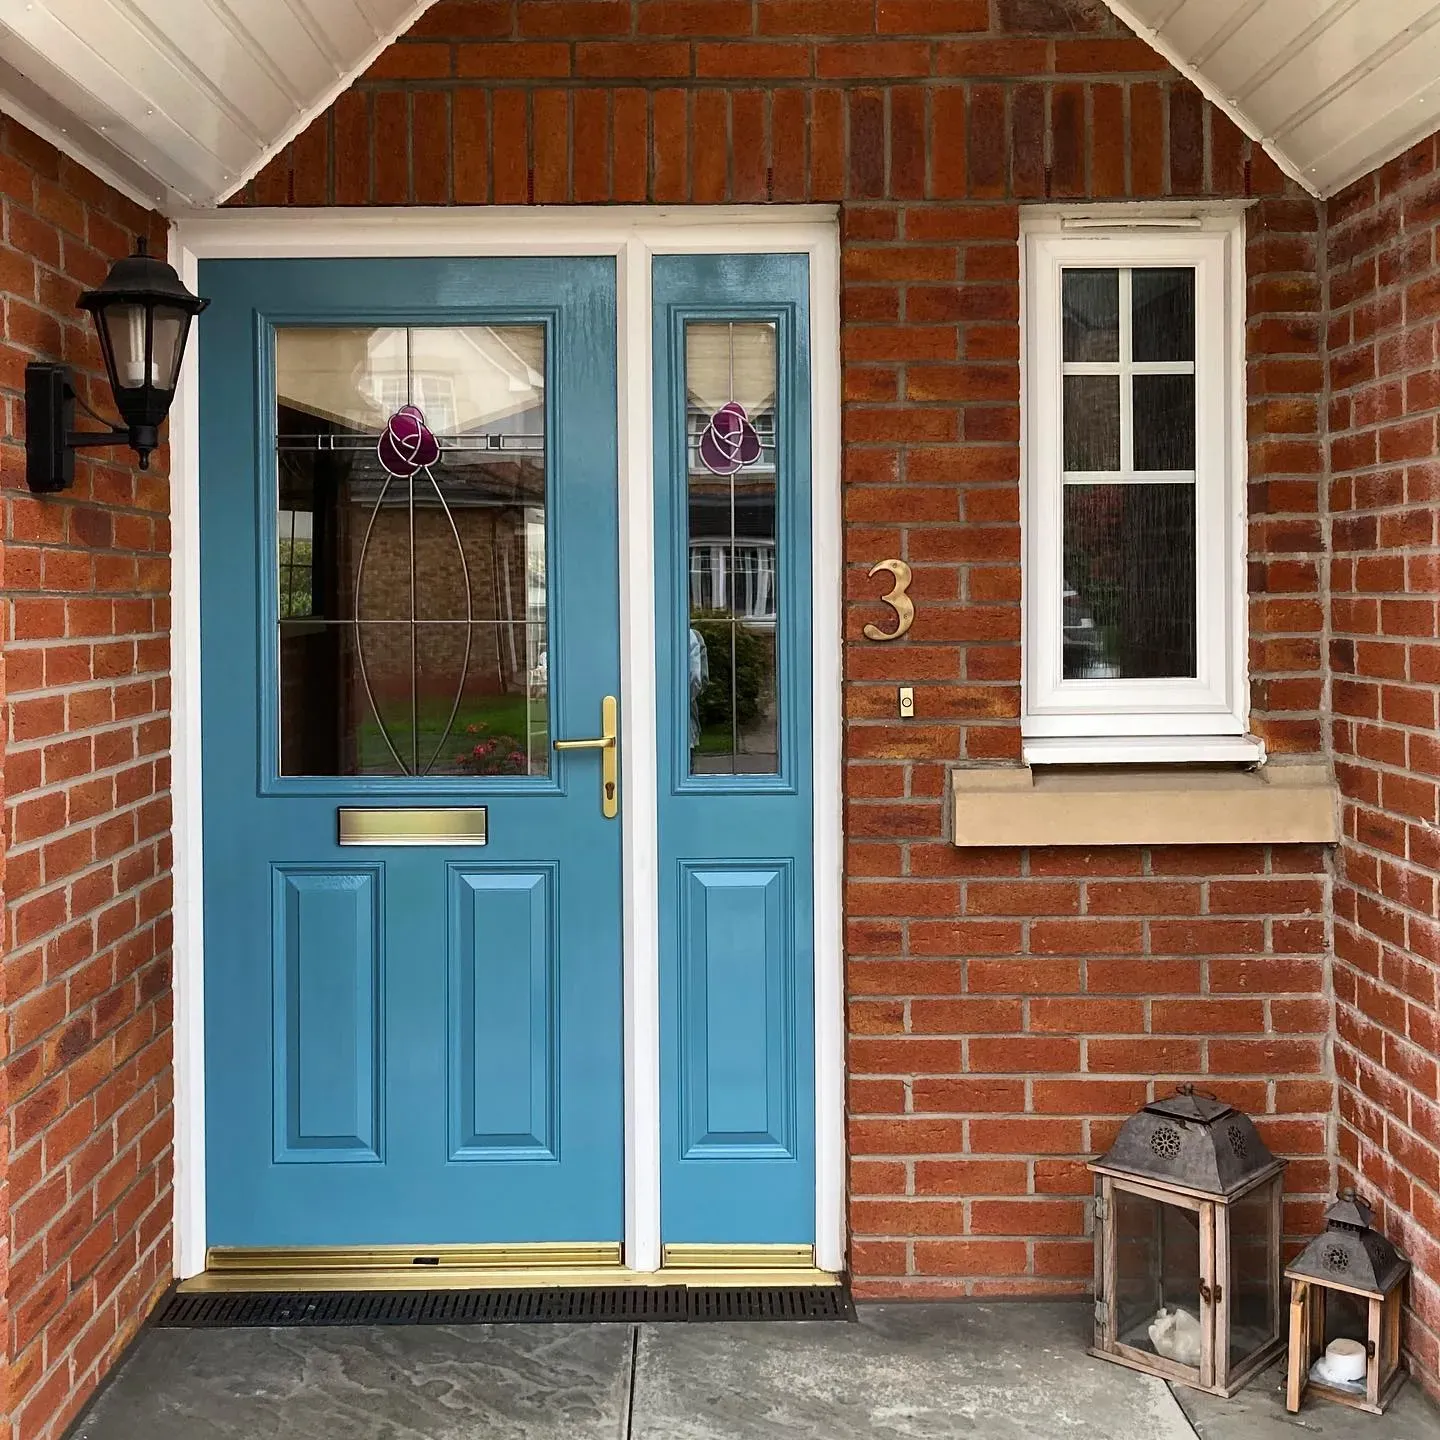 Farrow and Ball mid-tone blue paint colors for exterior